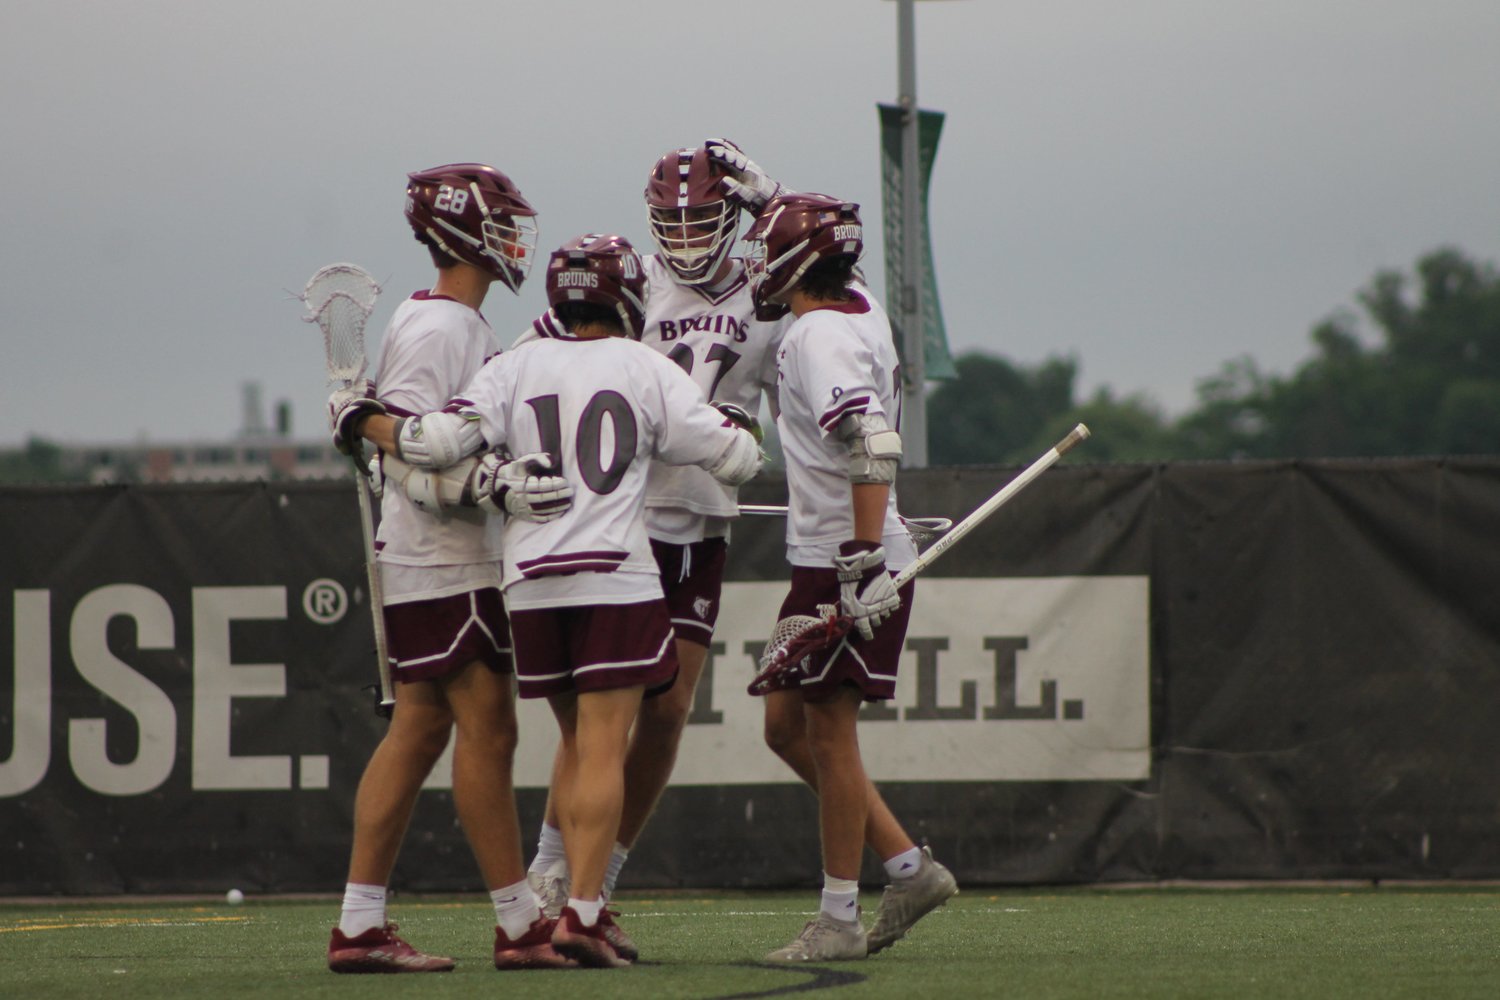 Broadneck players celebrated a goal scored by Jackson Shaw (left).